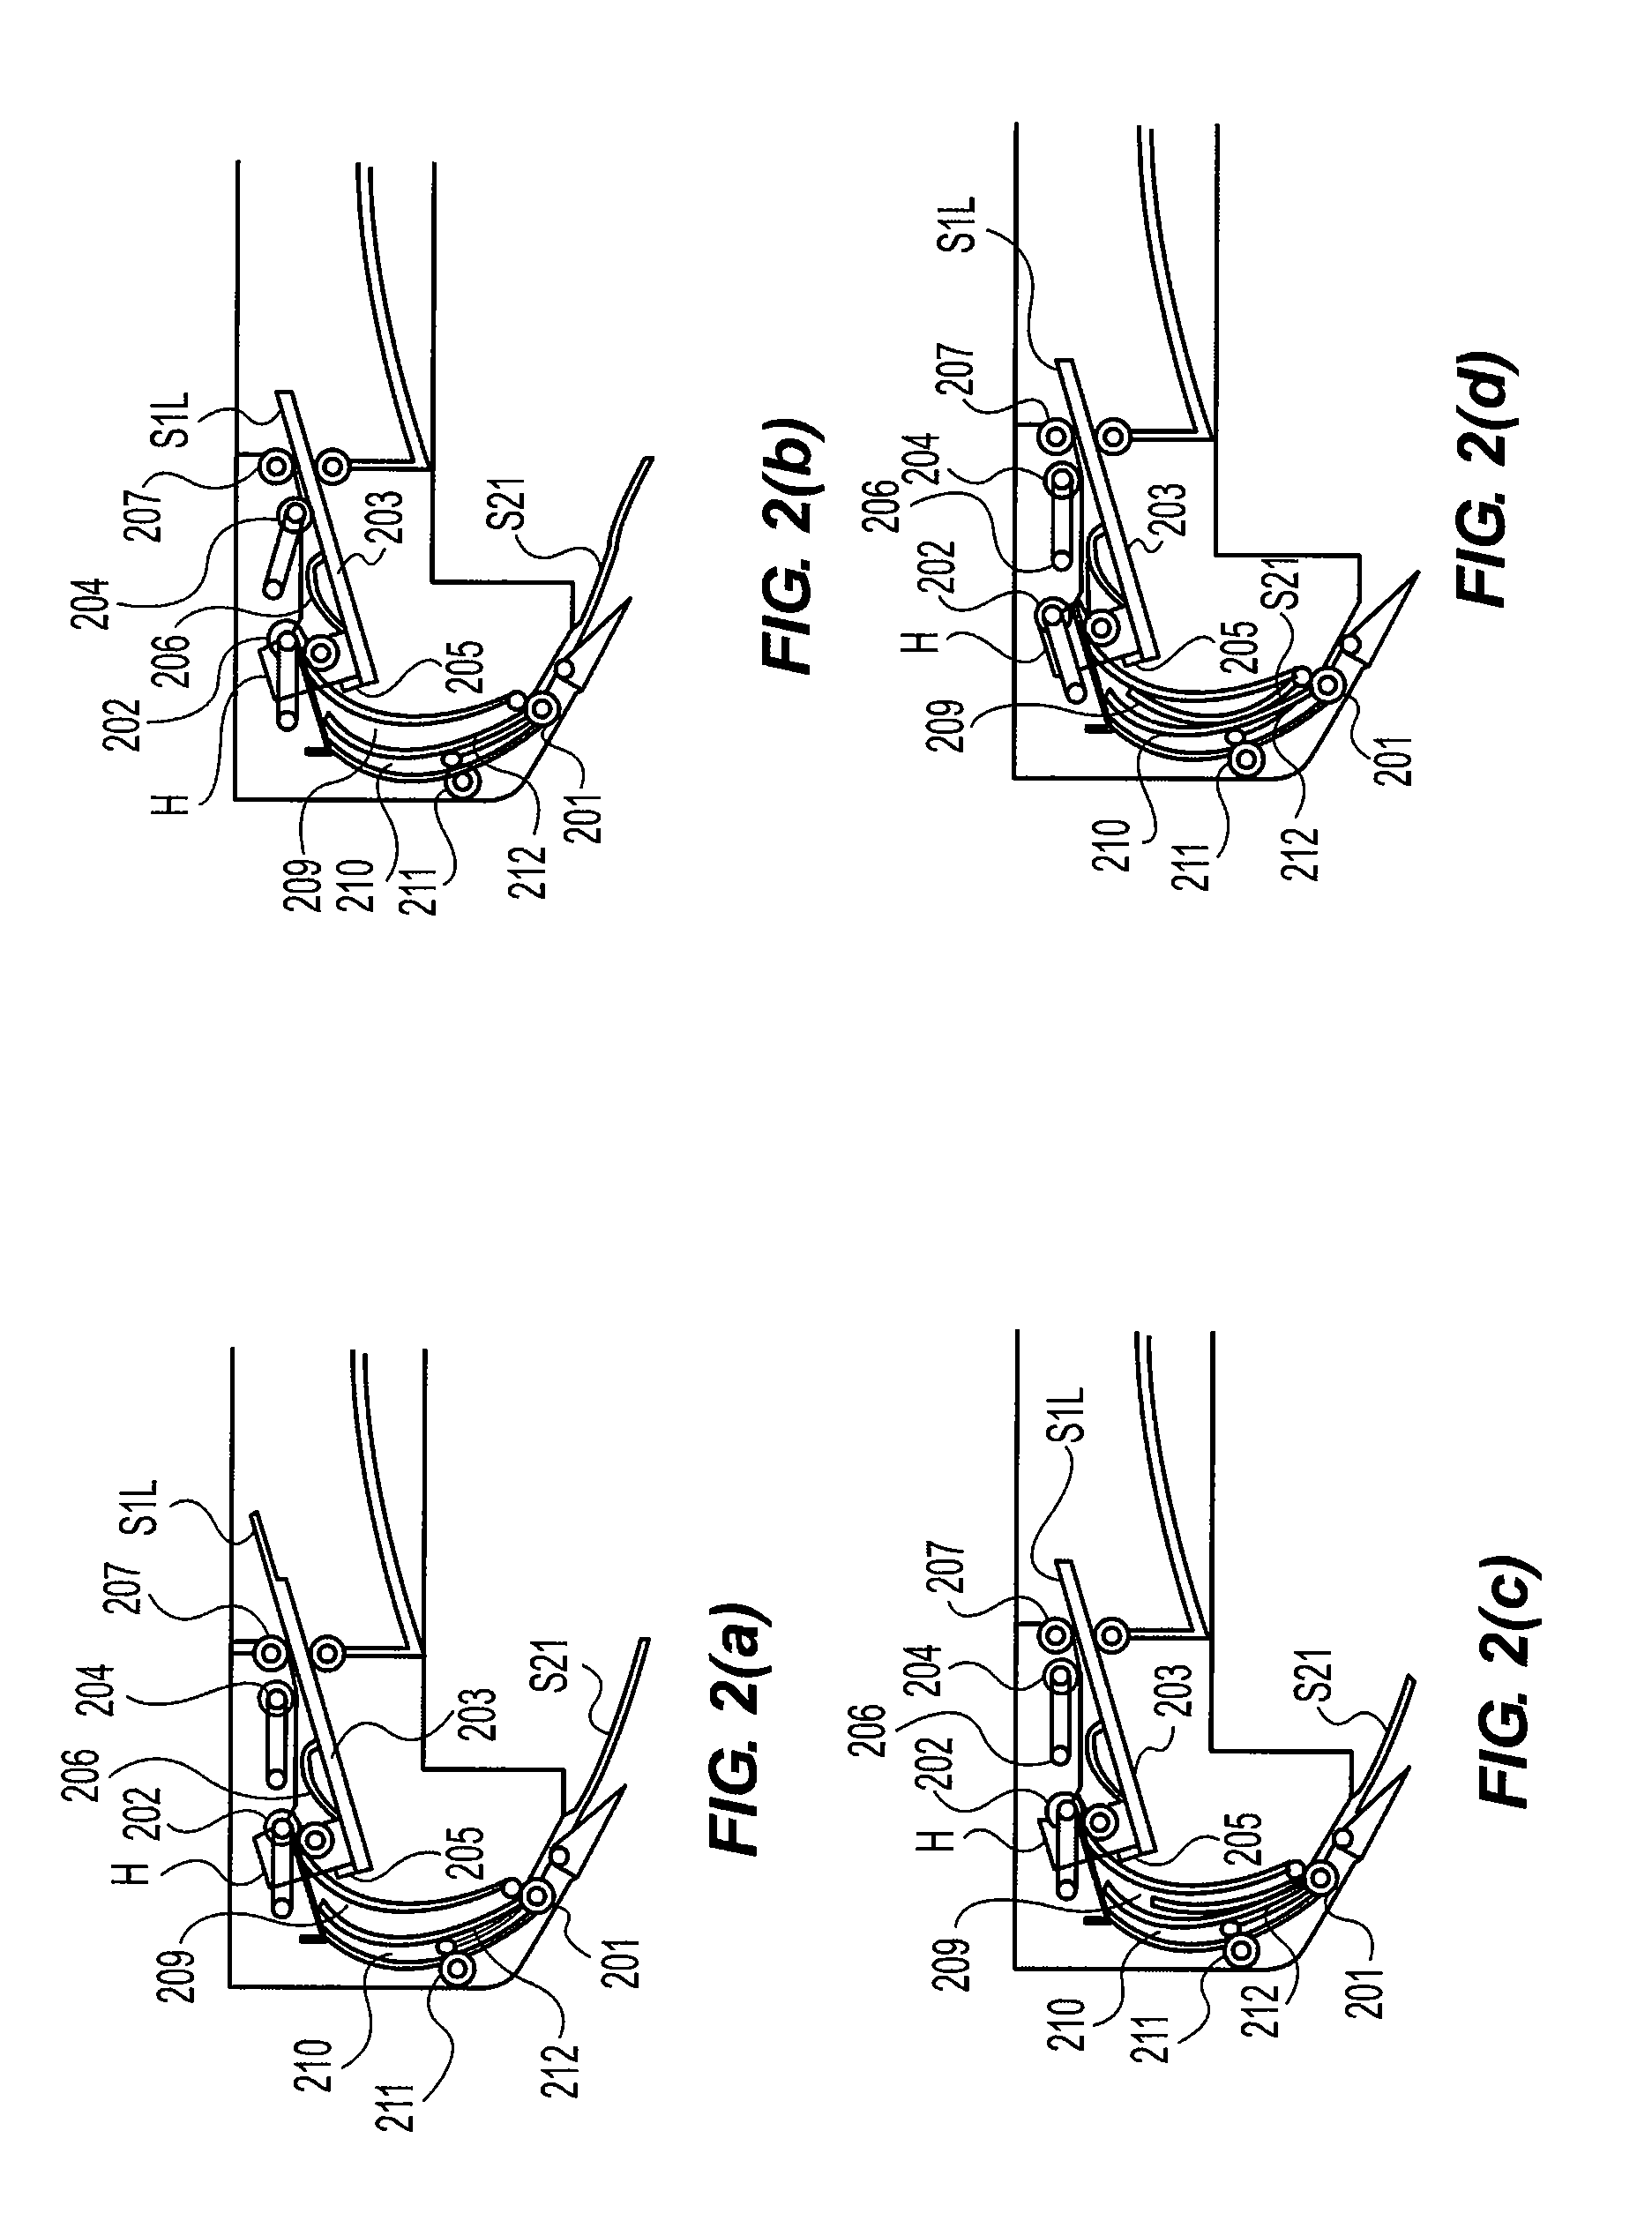 Sheet processing apparatus with branching paths for post-processing